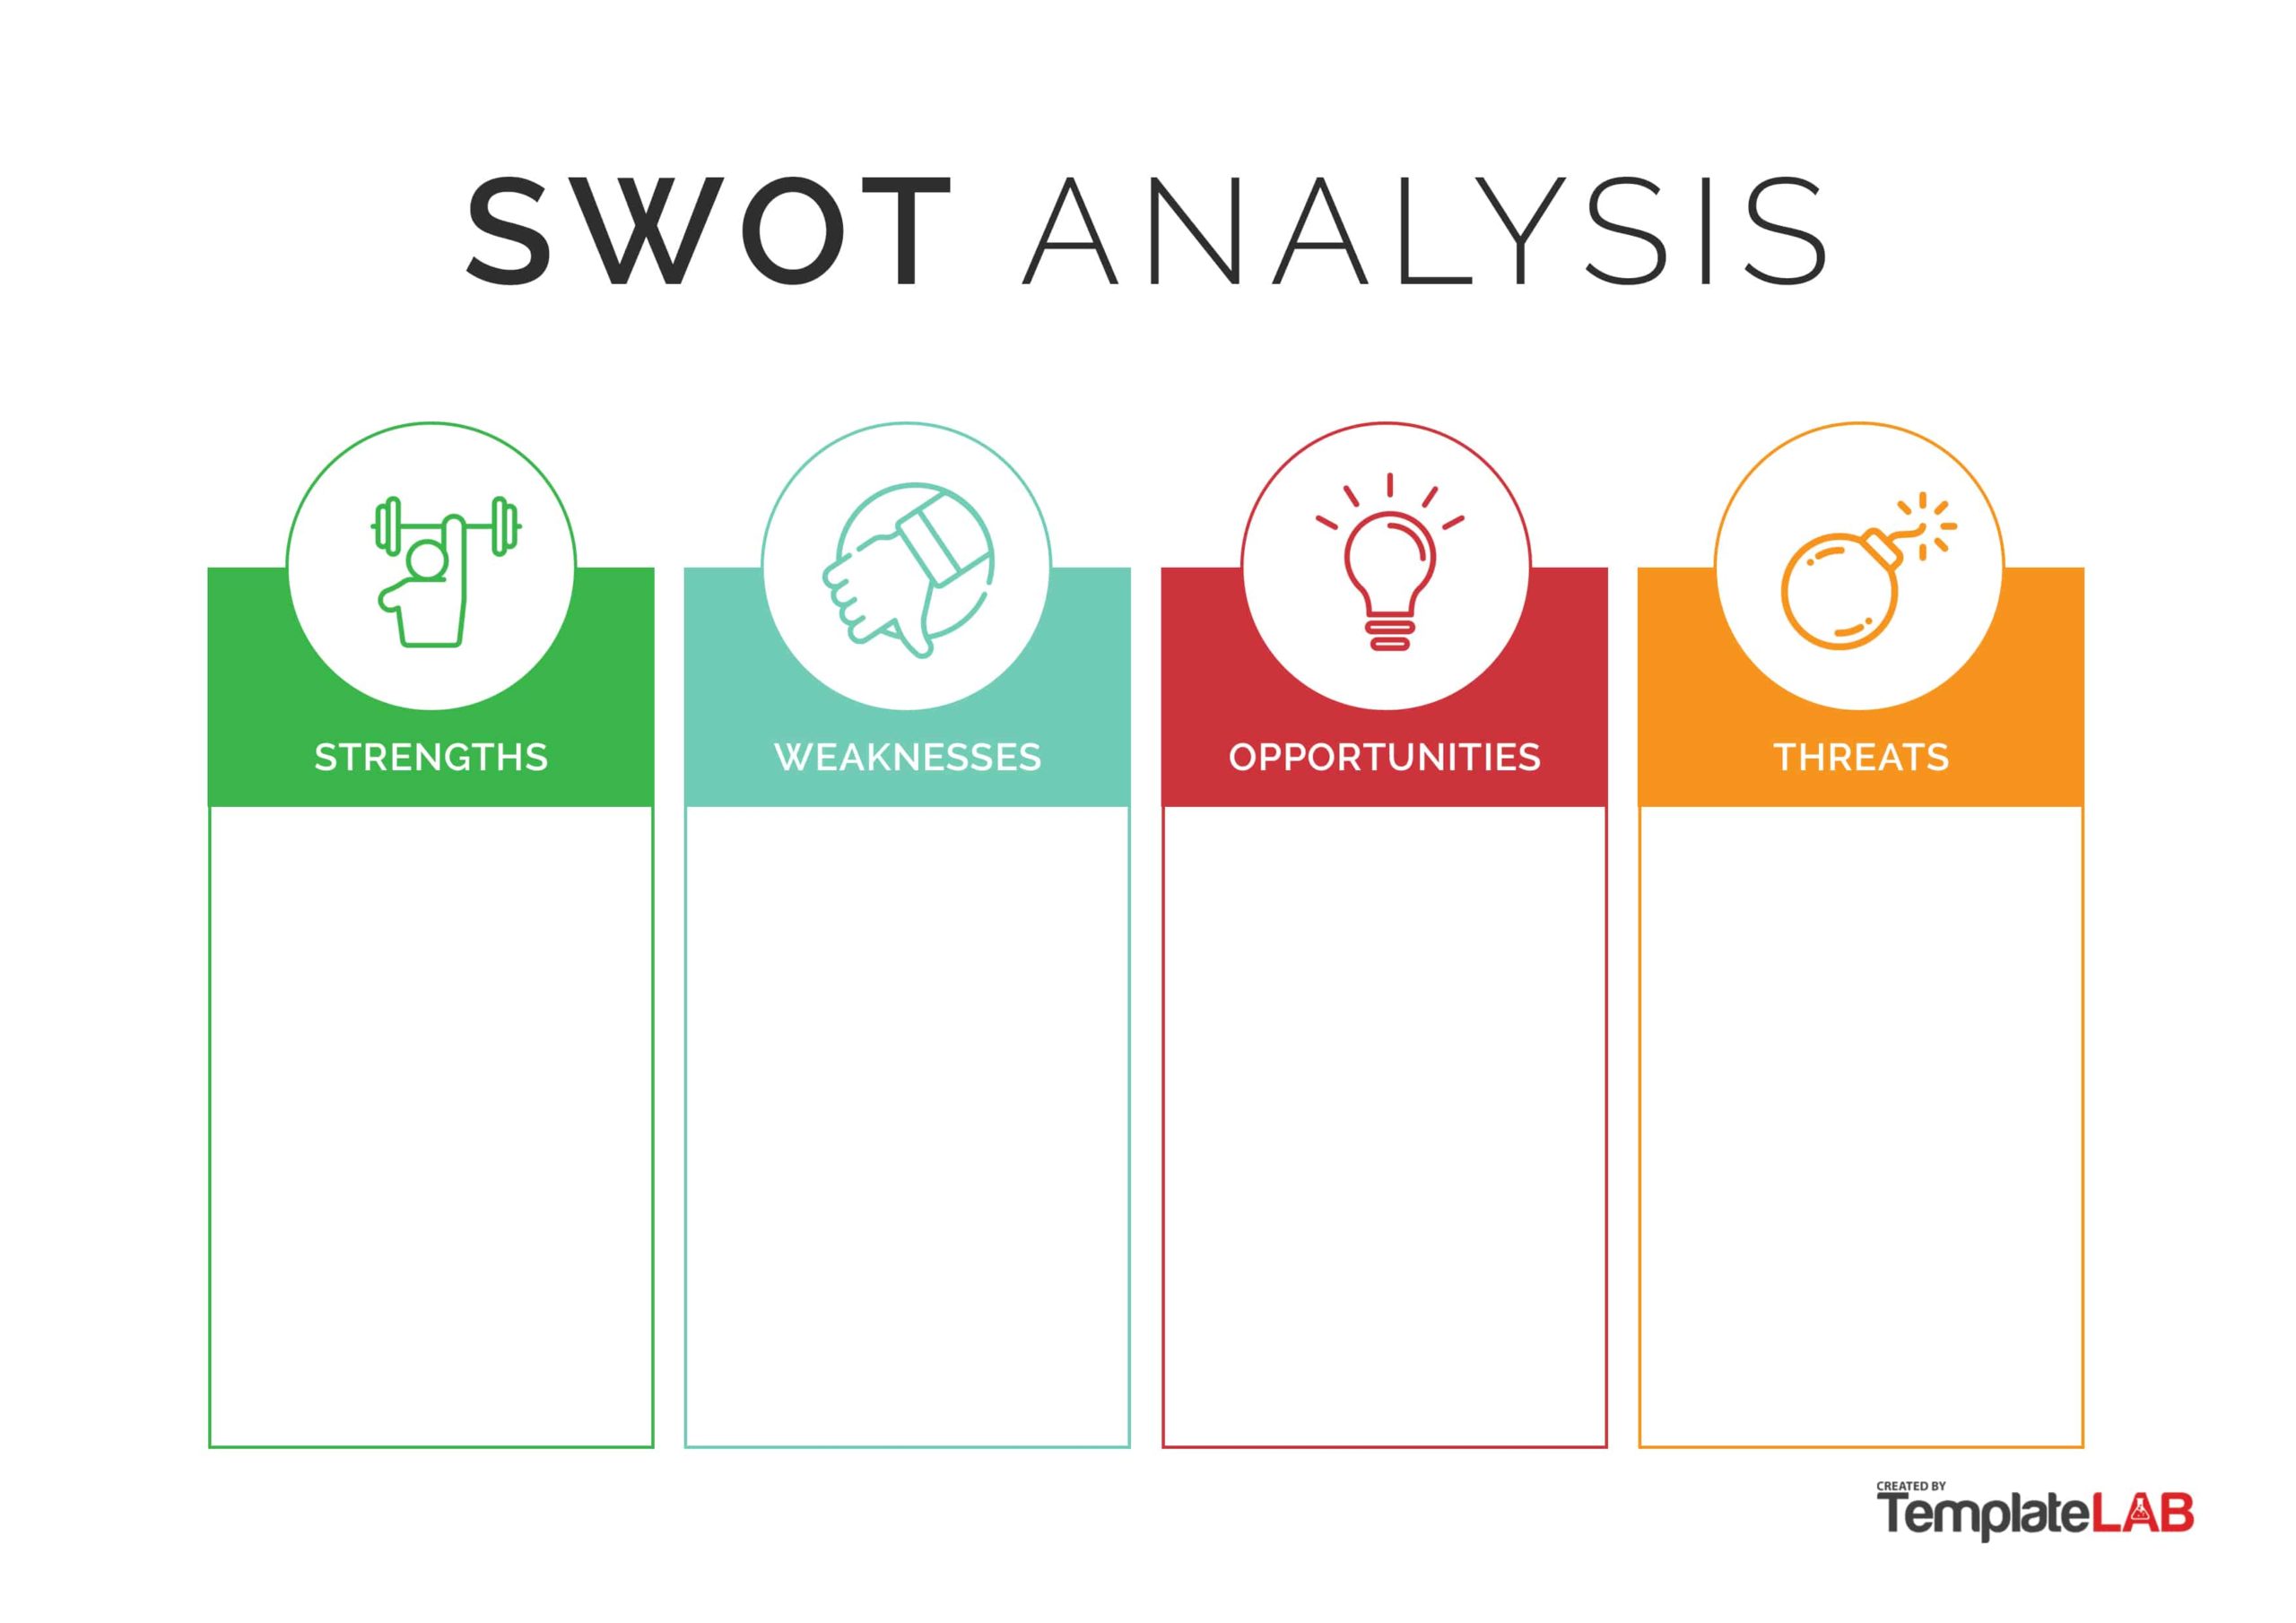 Swot Template Free Download